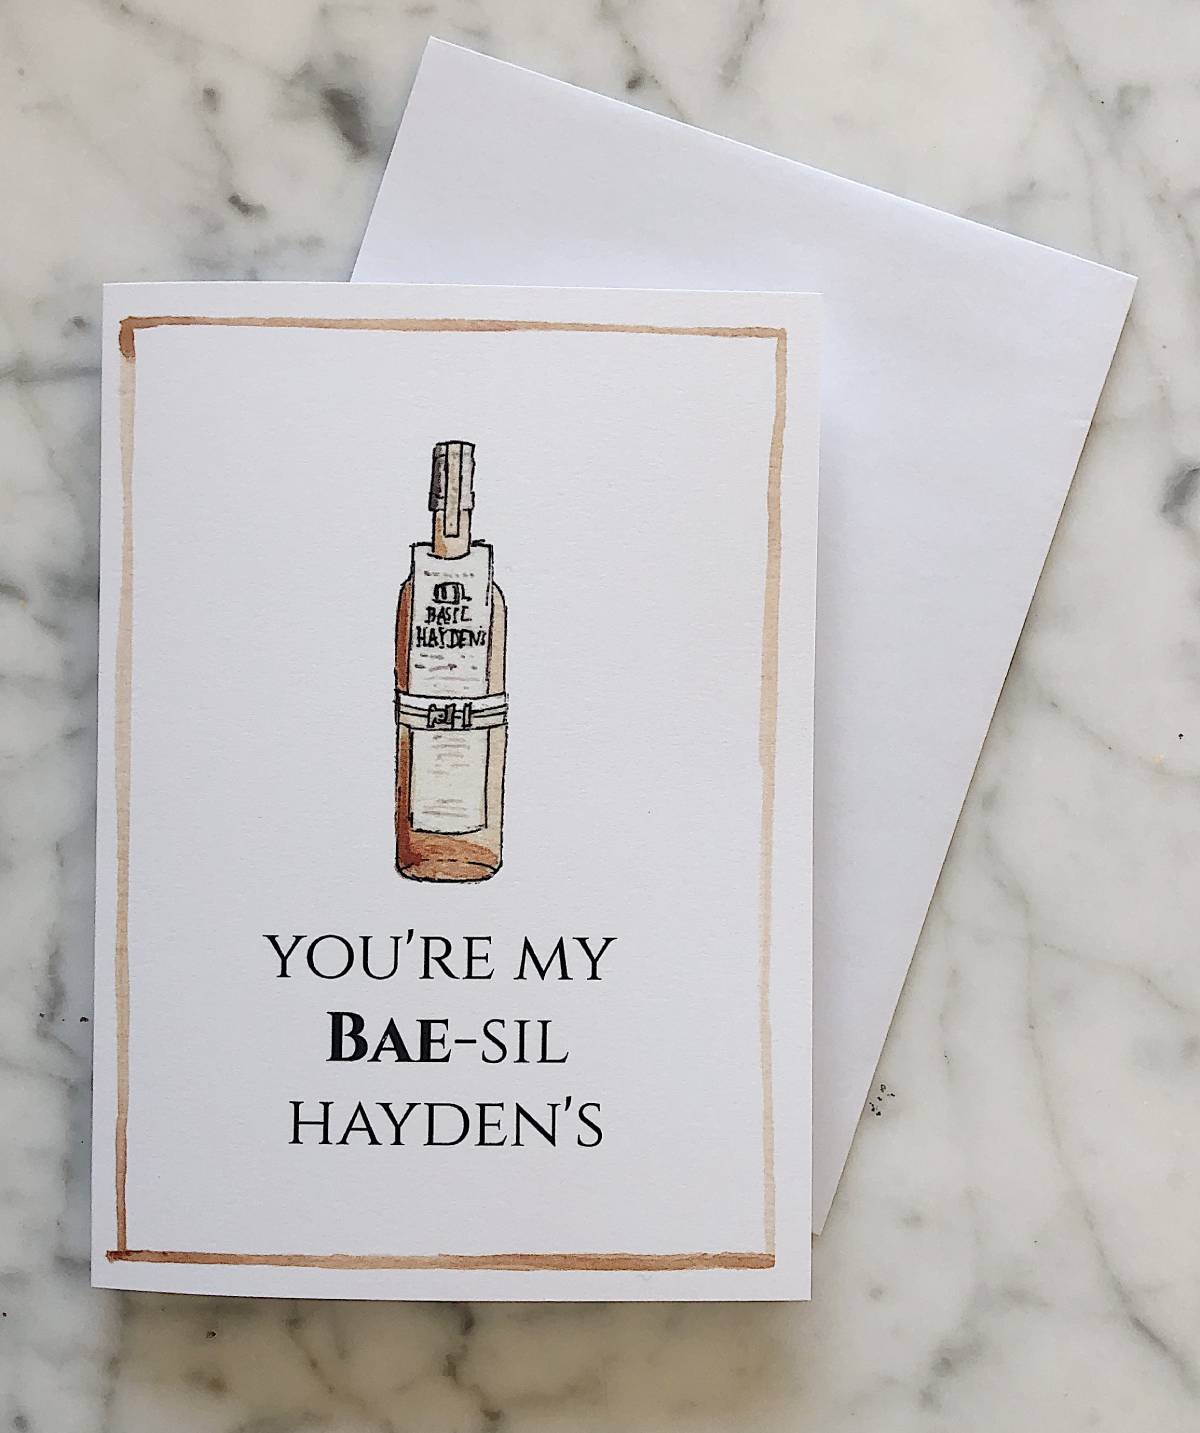 A Valentine's Day card with a white background and brown outline showing a watercolor illustration of Basil Hayden's with the text "You're my BAE-sil Hayden's"